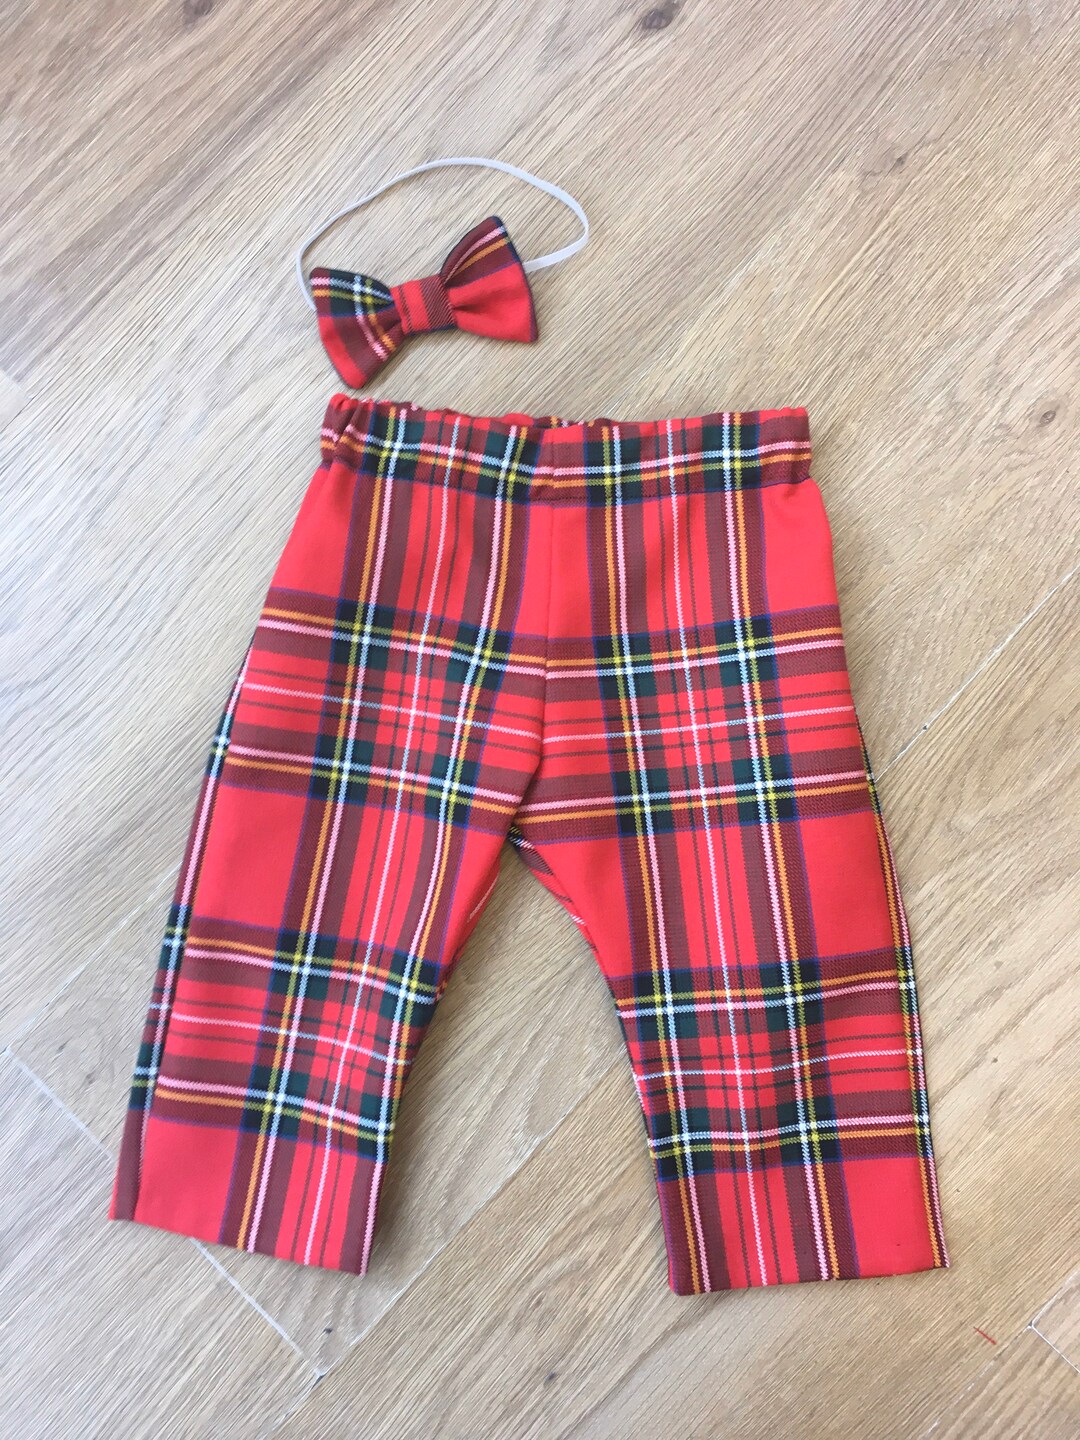 Royal Stewart Tartan Trousers Pants Trews With Bow Tie - Etsy